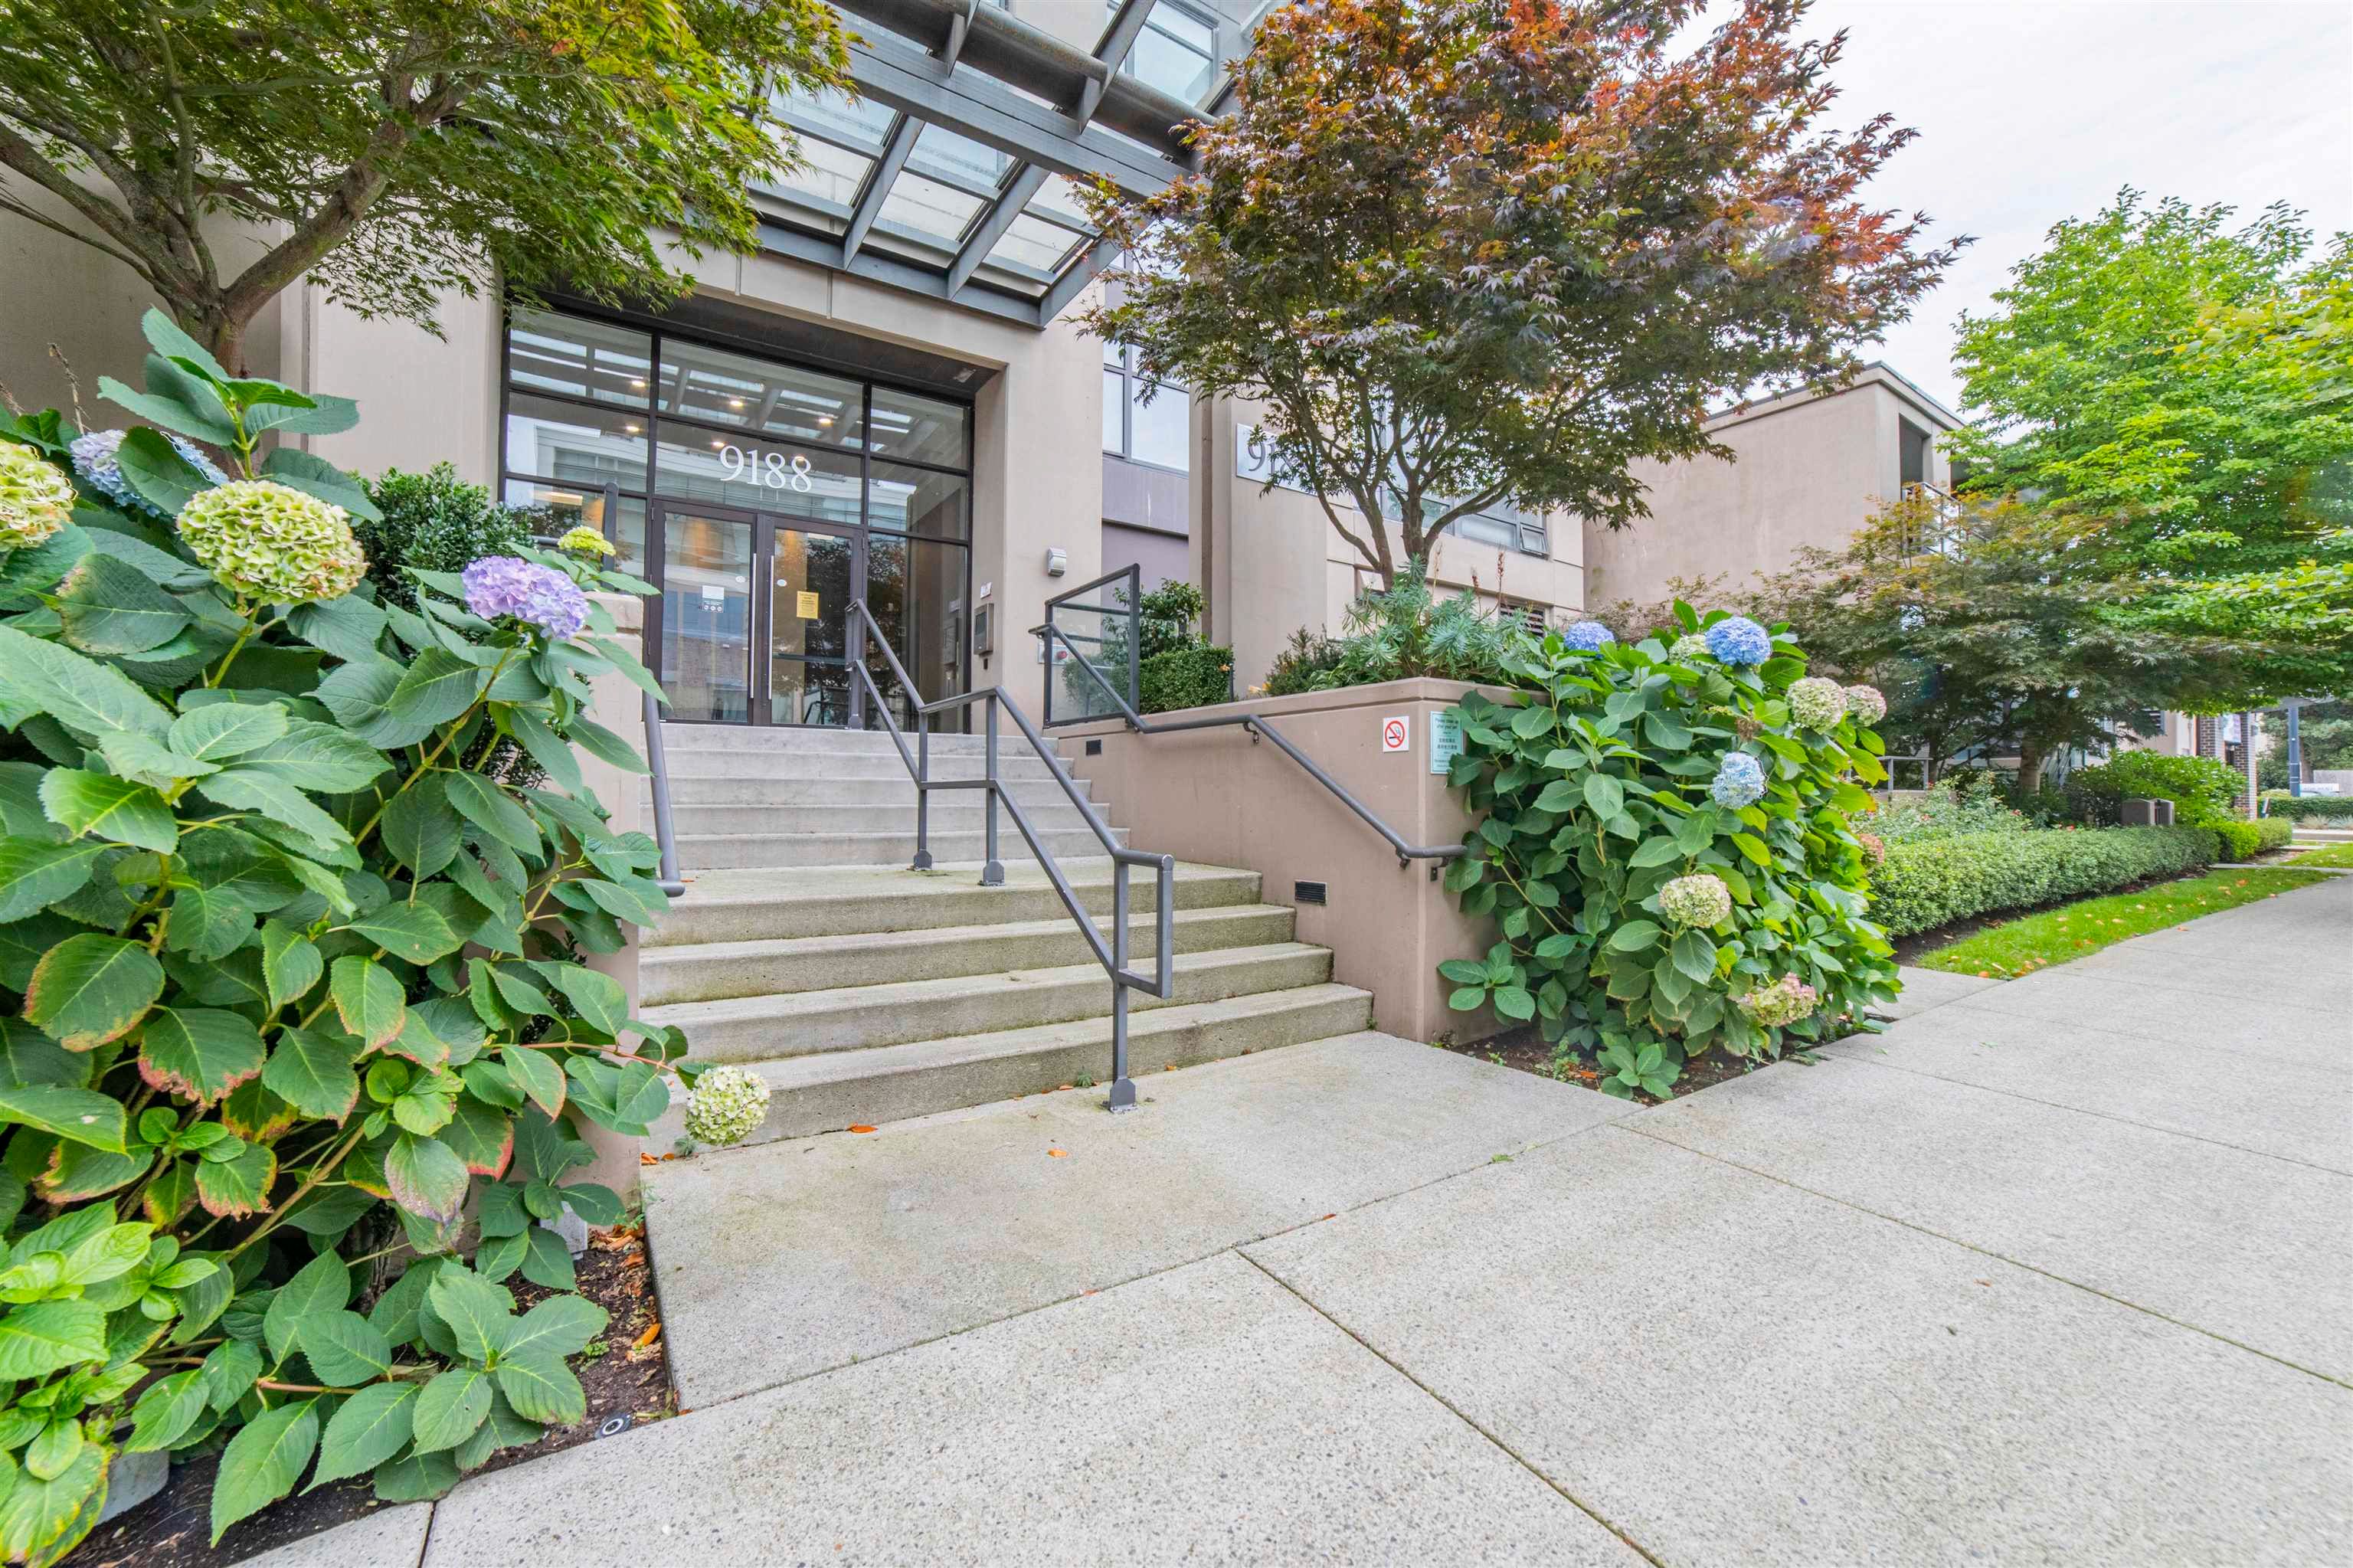 Main Photo: 508 9188 COOK ROAD in : McLennan North Condo for sale (Richmond)  : MLS®# R2628597